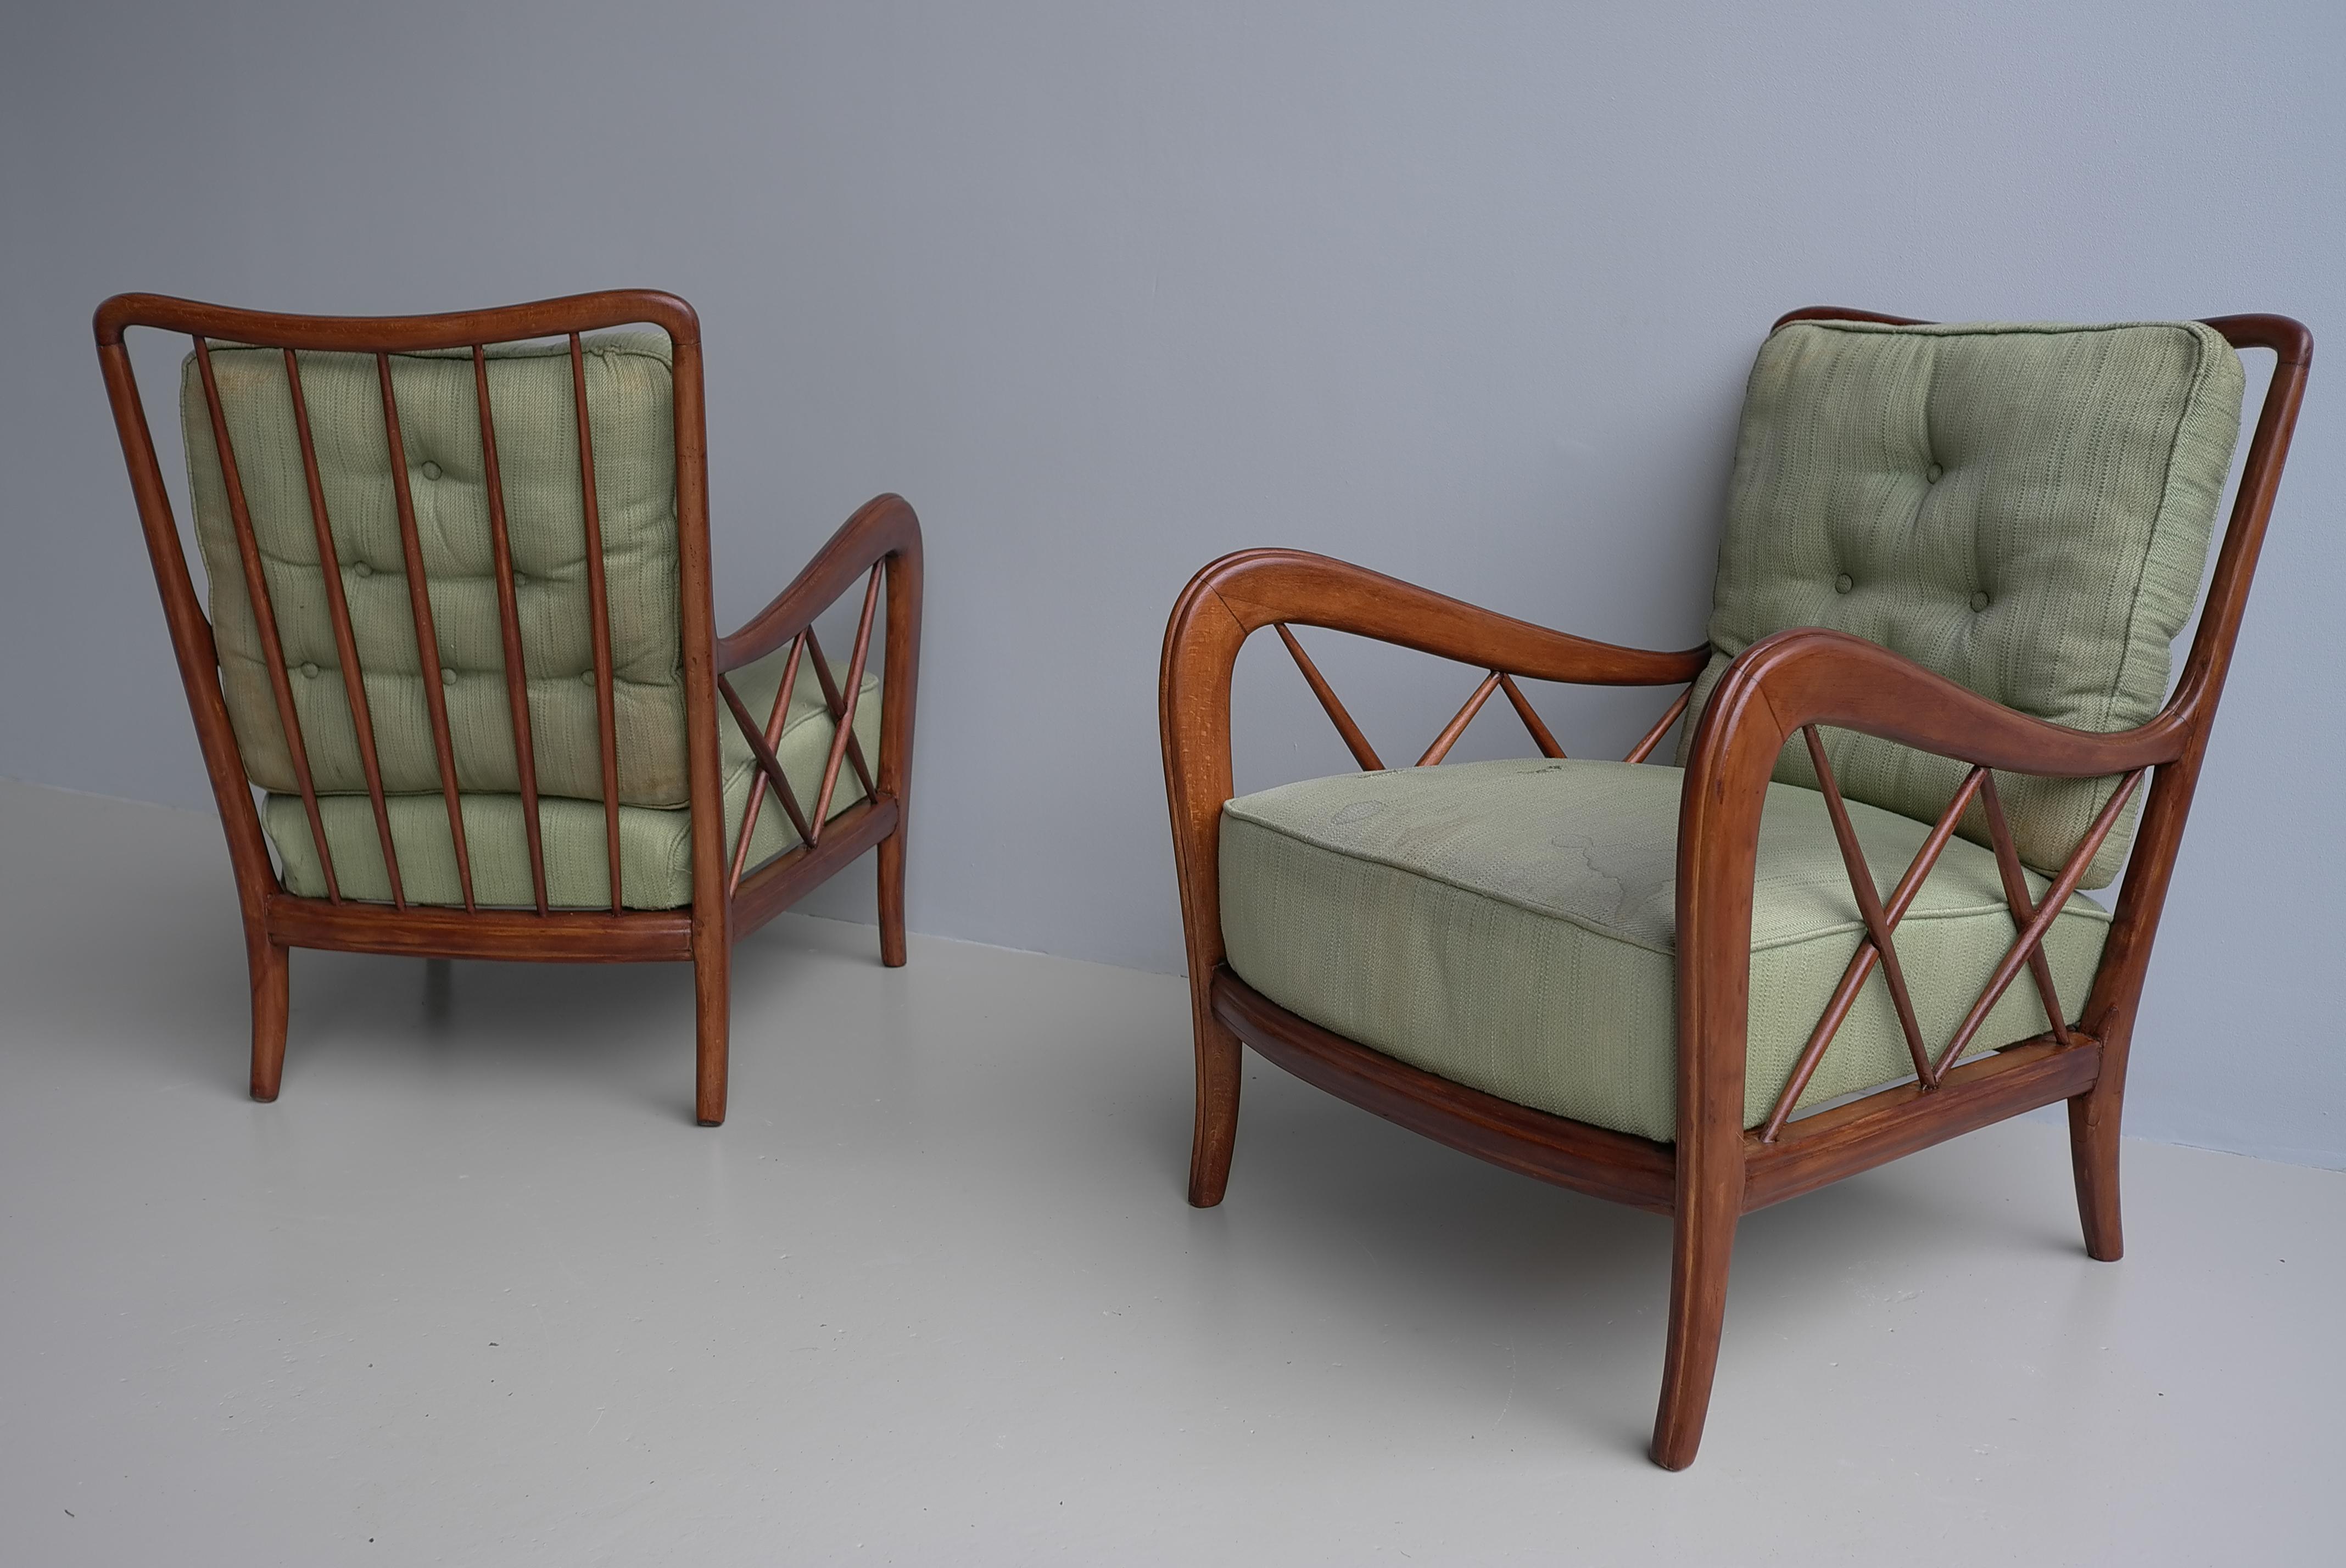 Pair of arm Chairs with curled and cross -shaped armrests, curly backrests with vertical struts. 

These chairs we have attributed to Paolo Buffa but they are always sold as designed by Paolo Buffa. So probably designed by Paolo Buffa we prefer to